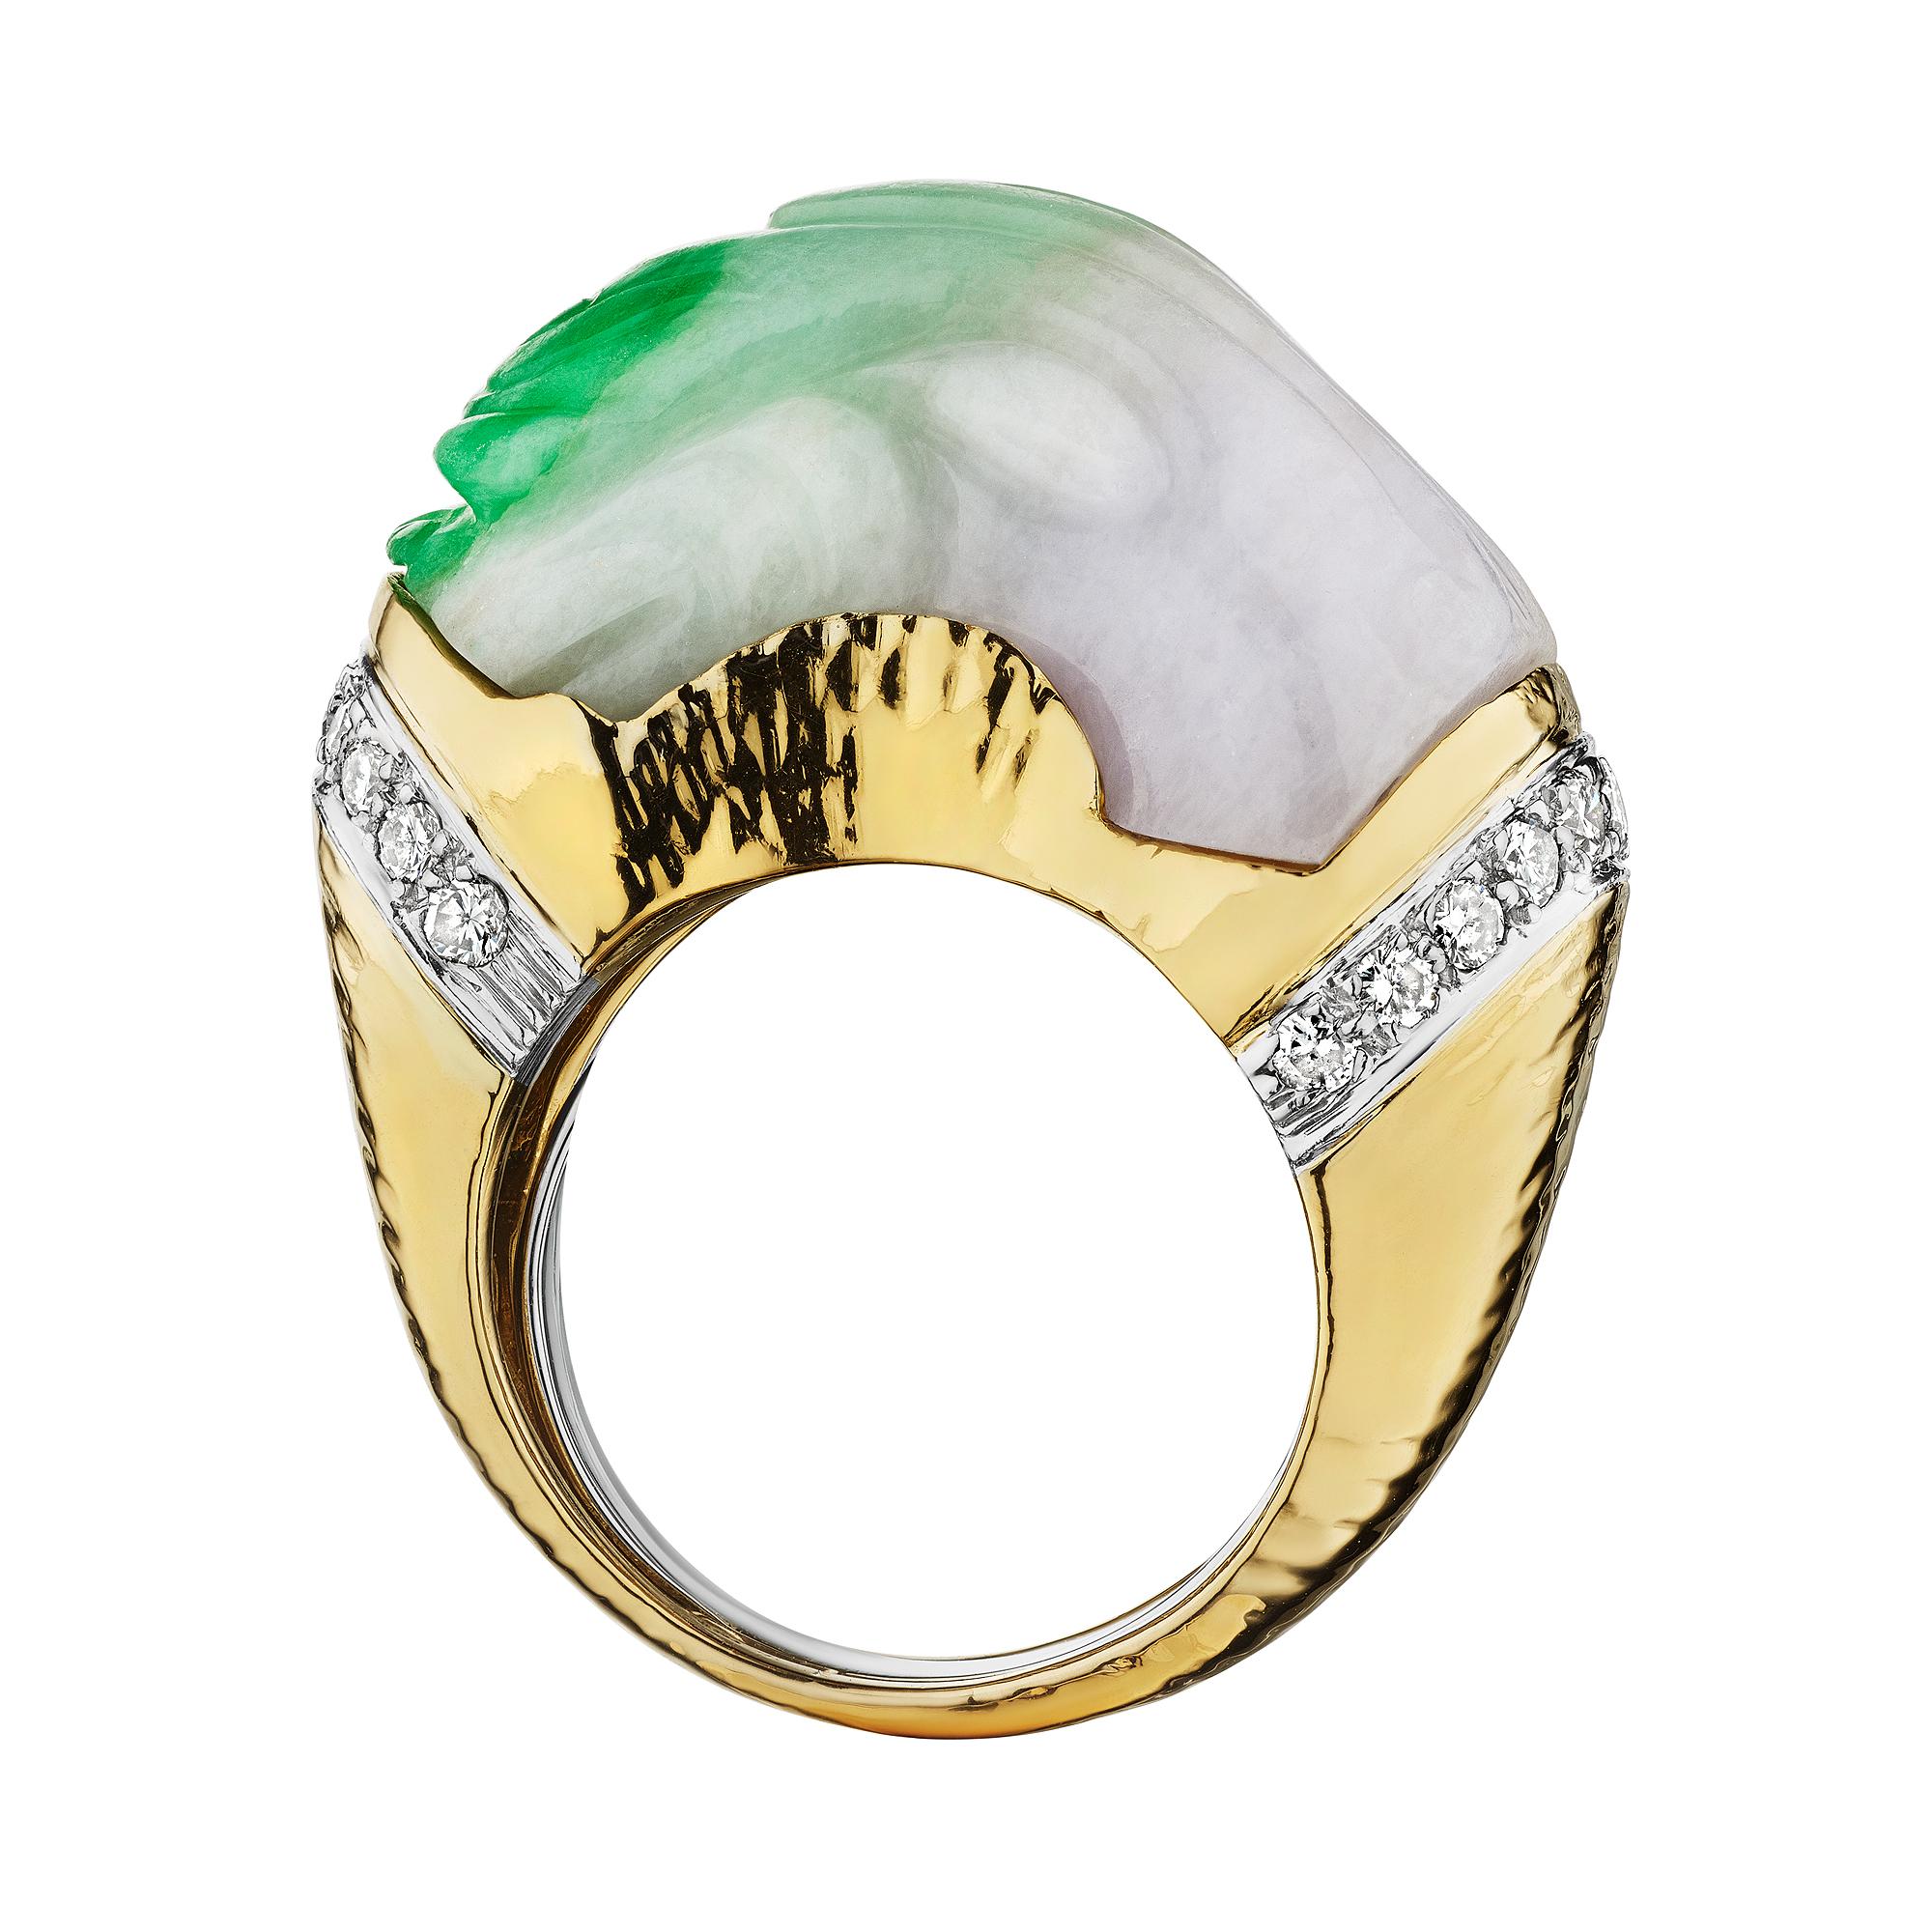 Dragons symbolize power, strength, and good luck.  Wear these virtues on your finger with this David Webb carved jade dragon head diamond platinum and gold ring.  Subtly carved with visually exciting vivid green splashes of color, this jade ring is